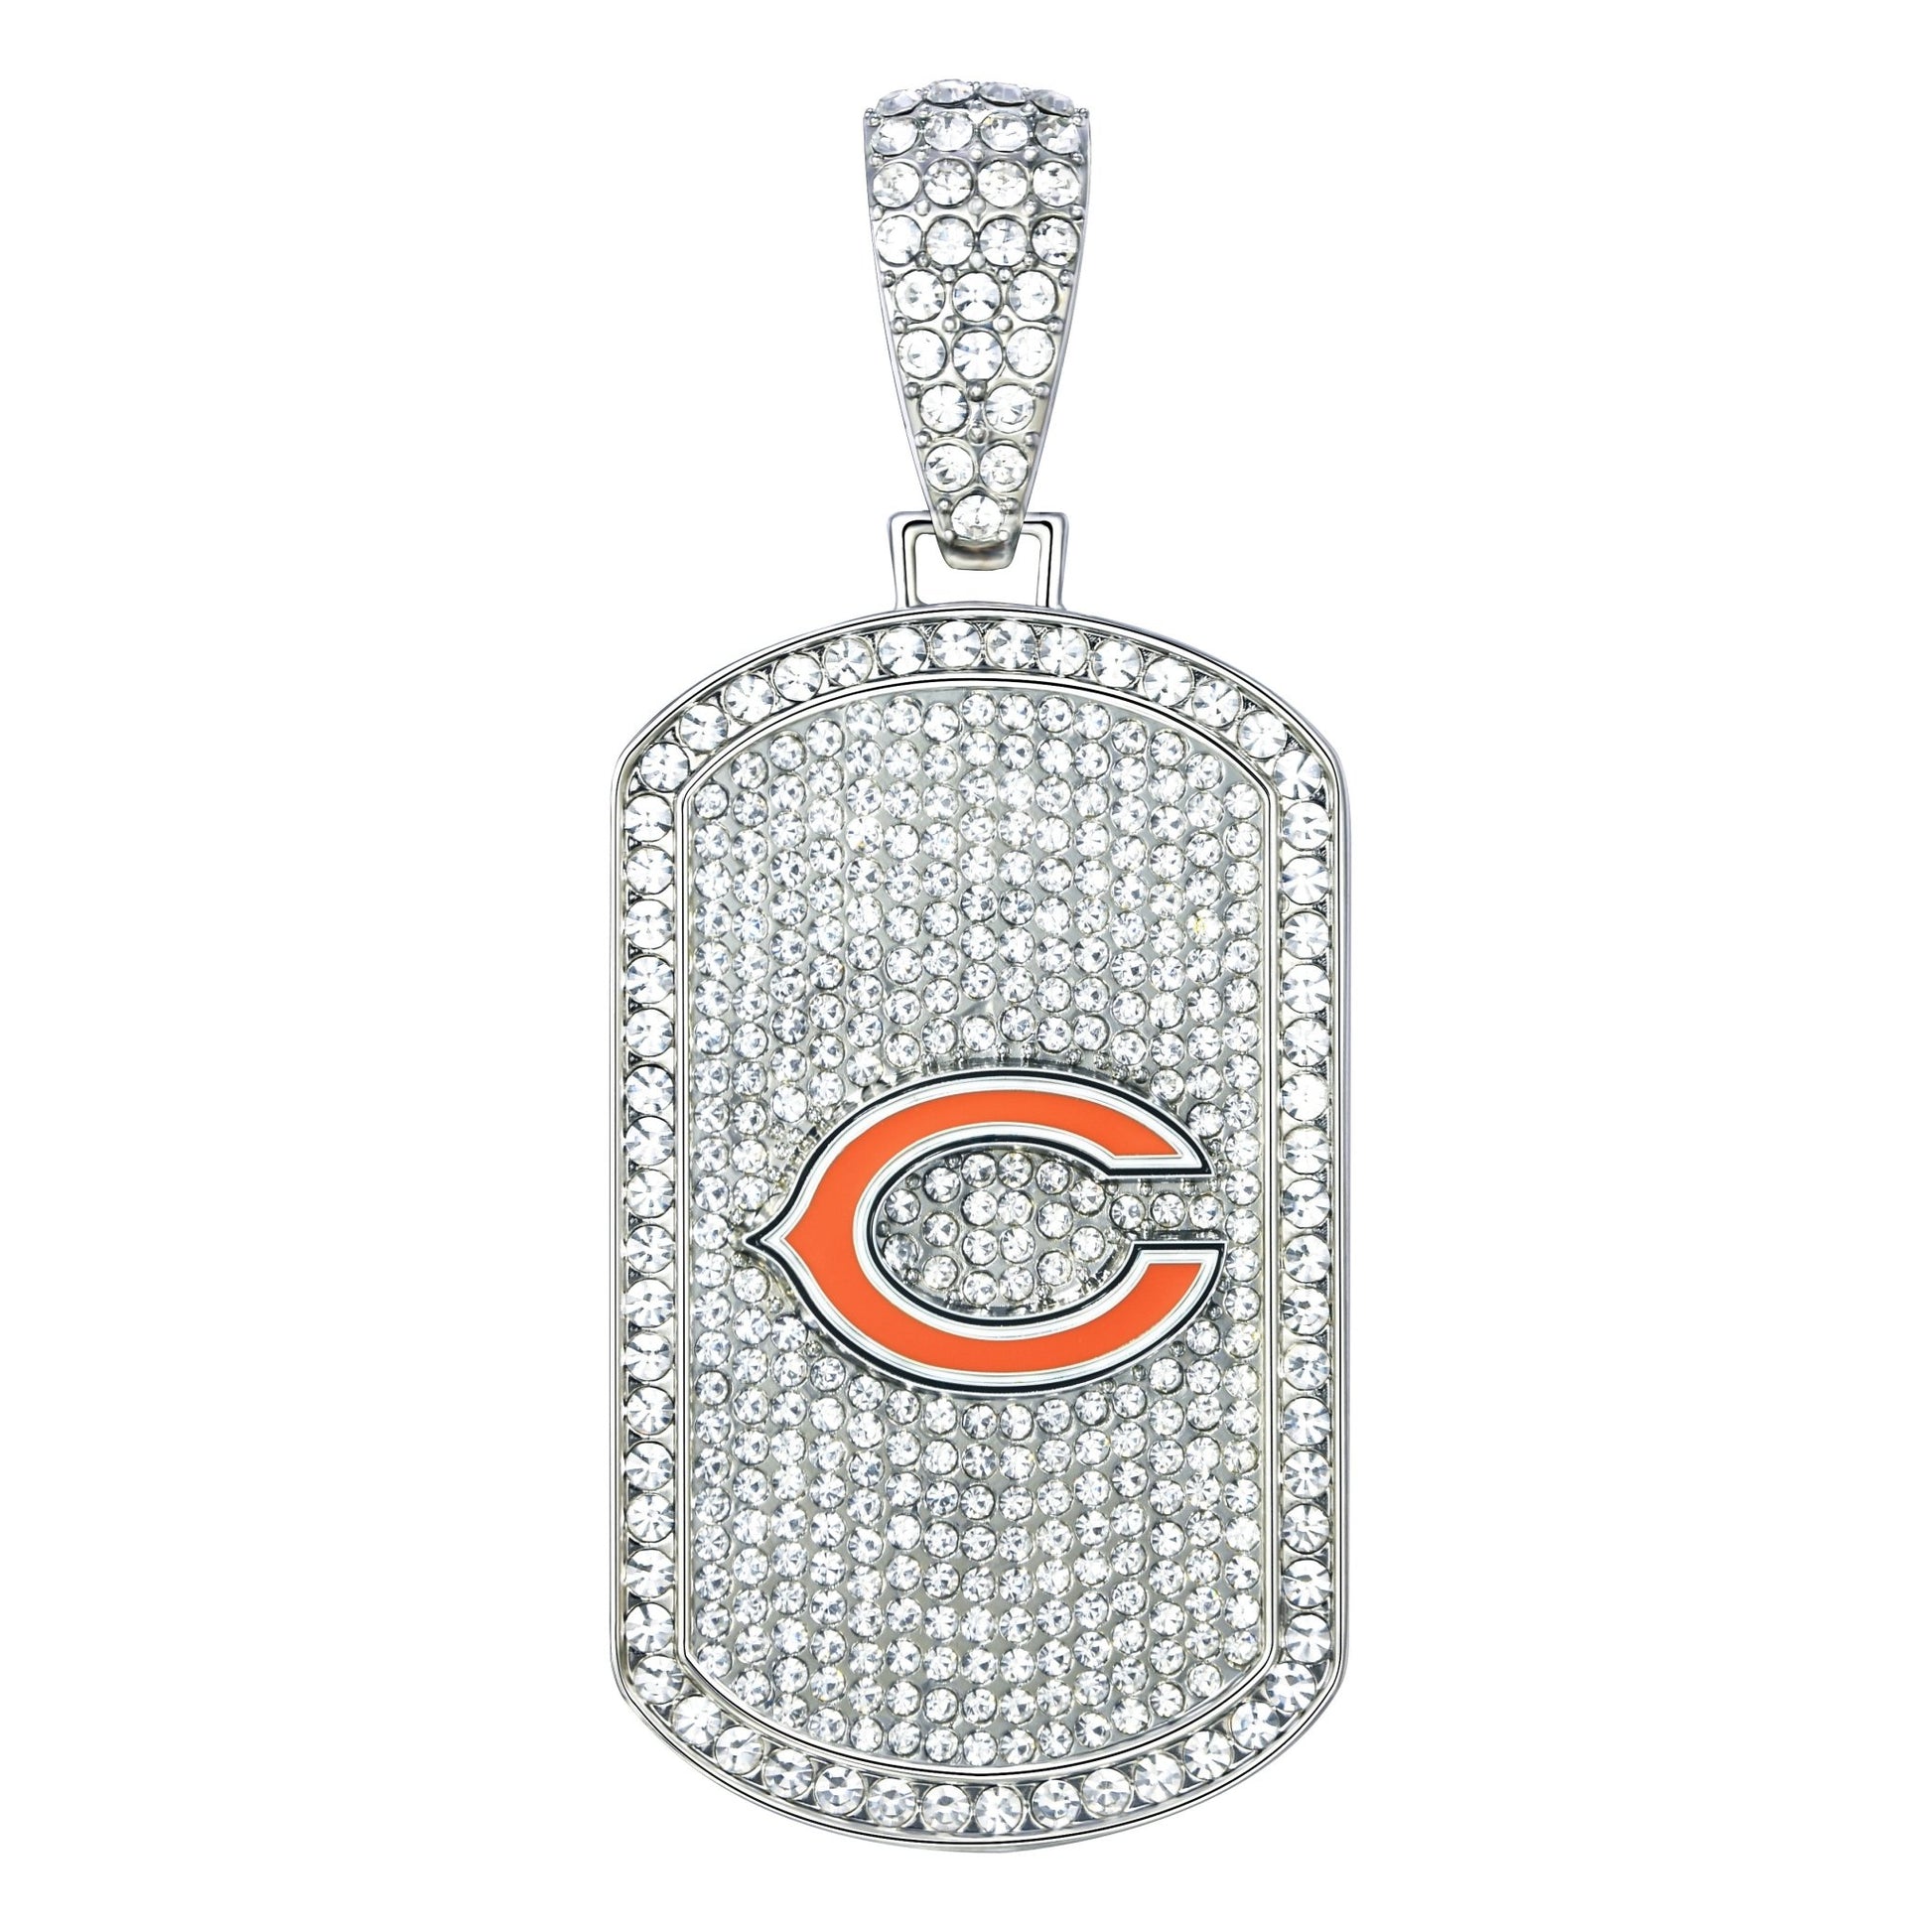 NFL Bling Dog Tag Necklace - Gamedays Gear - Chicago Bears